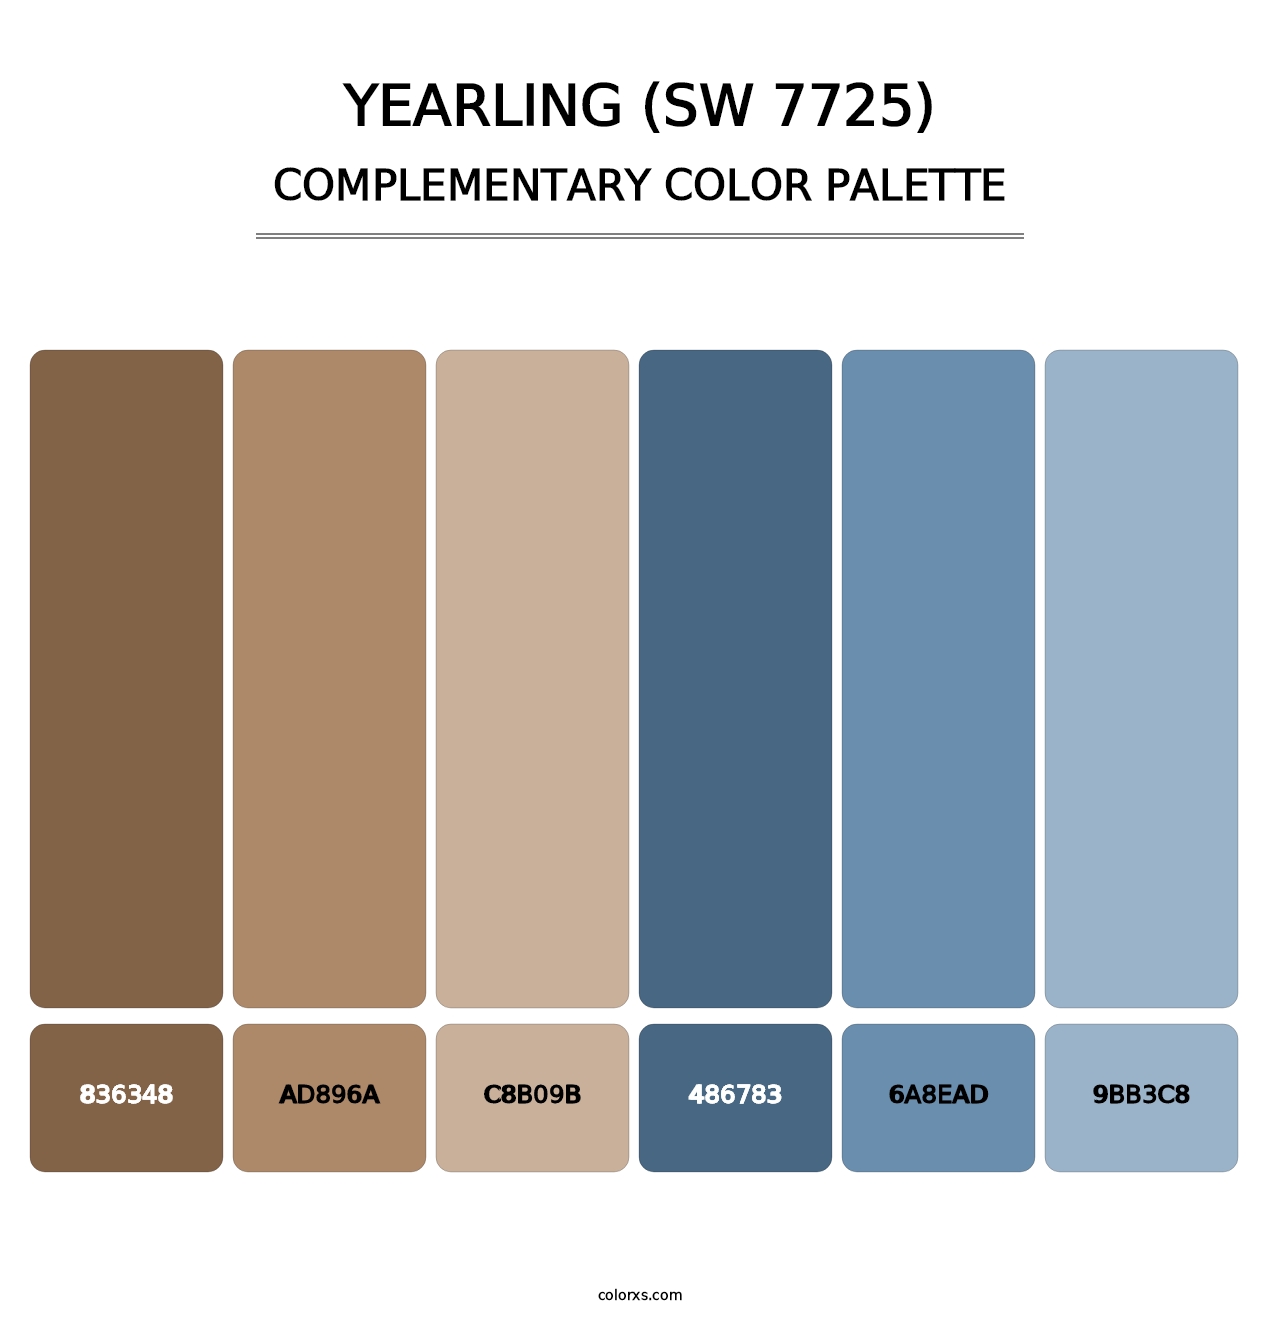 Yearling (SW 7725) - Complementary Color Palette